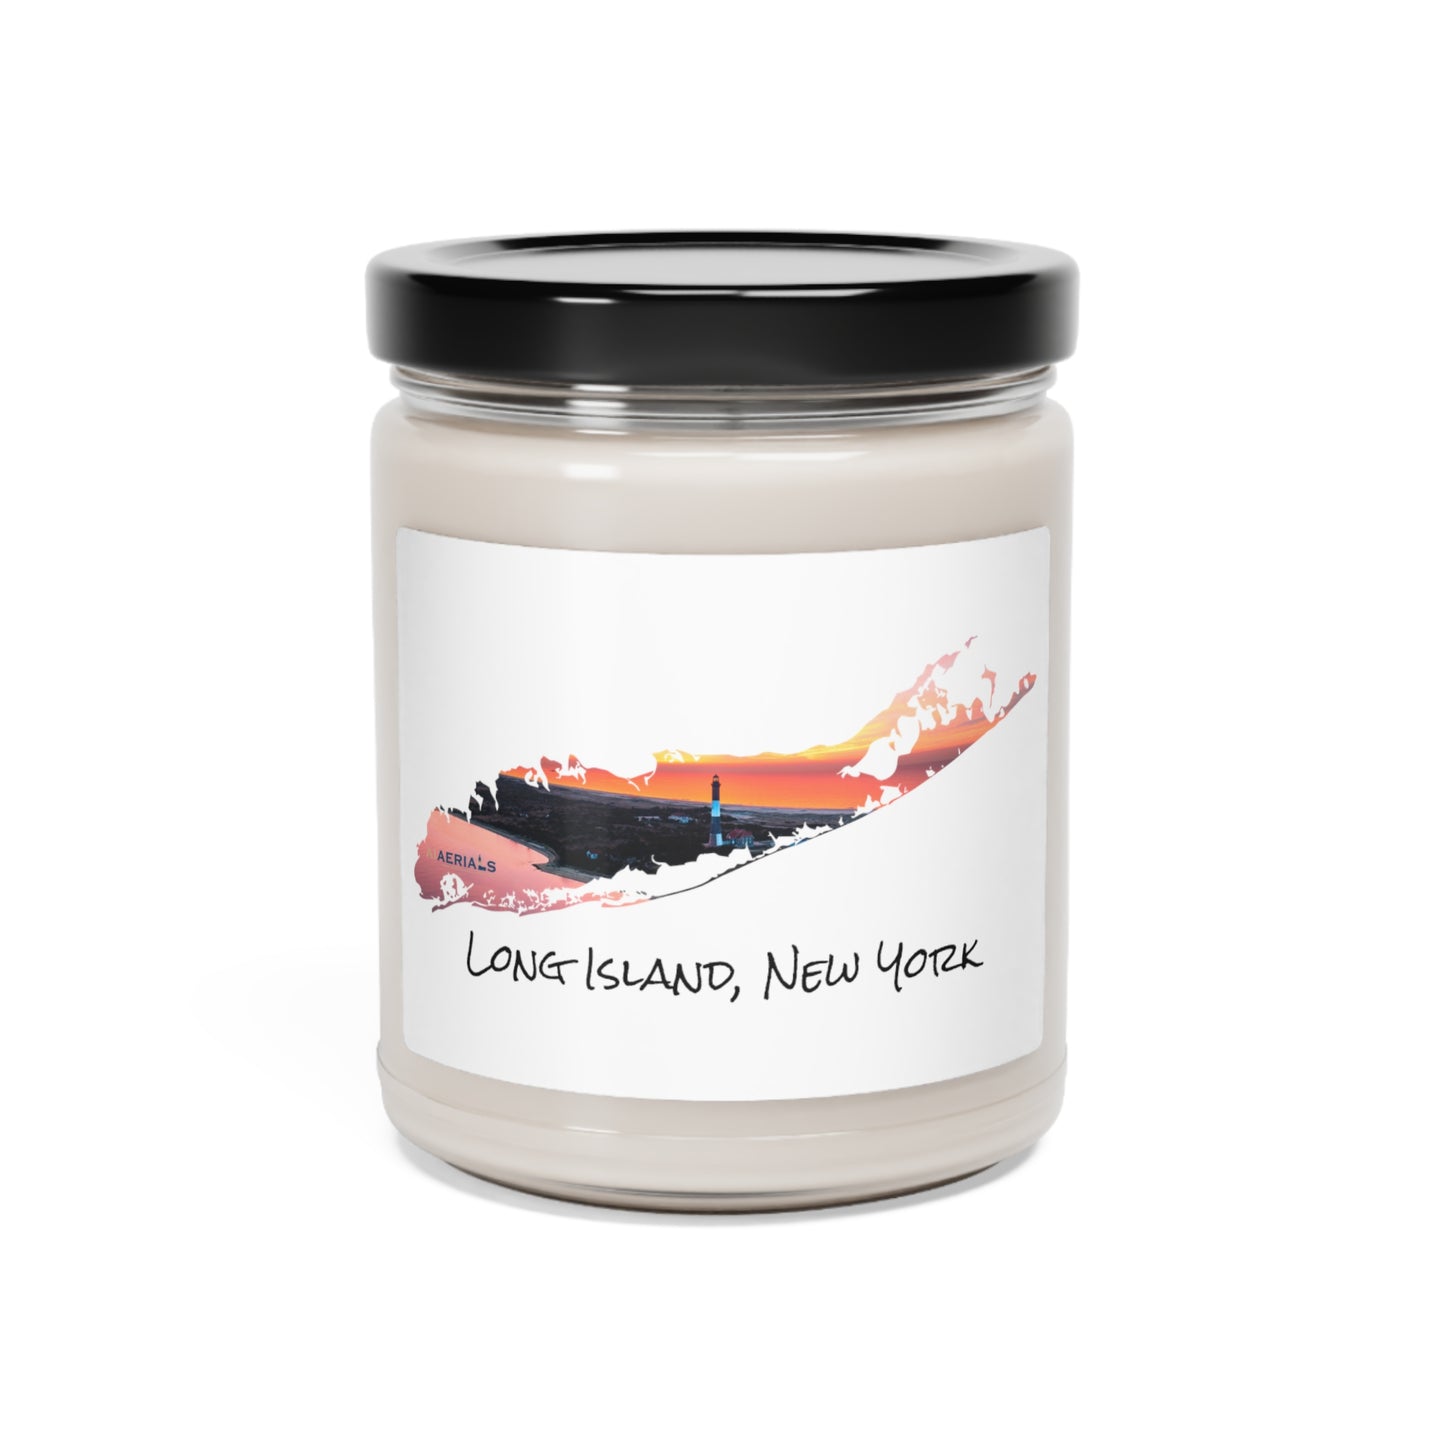 Scented Soy Candle, 9oz White - Fire Island Lighthouse